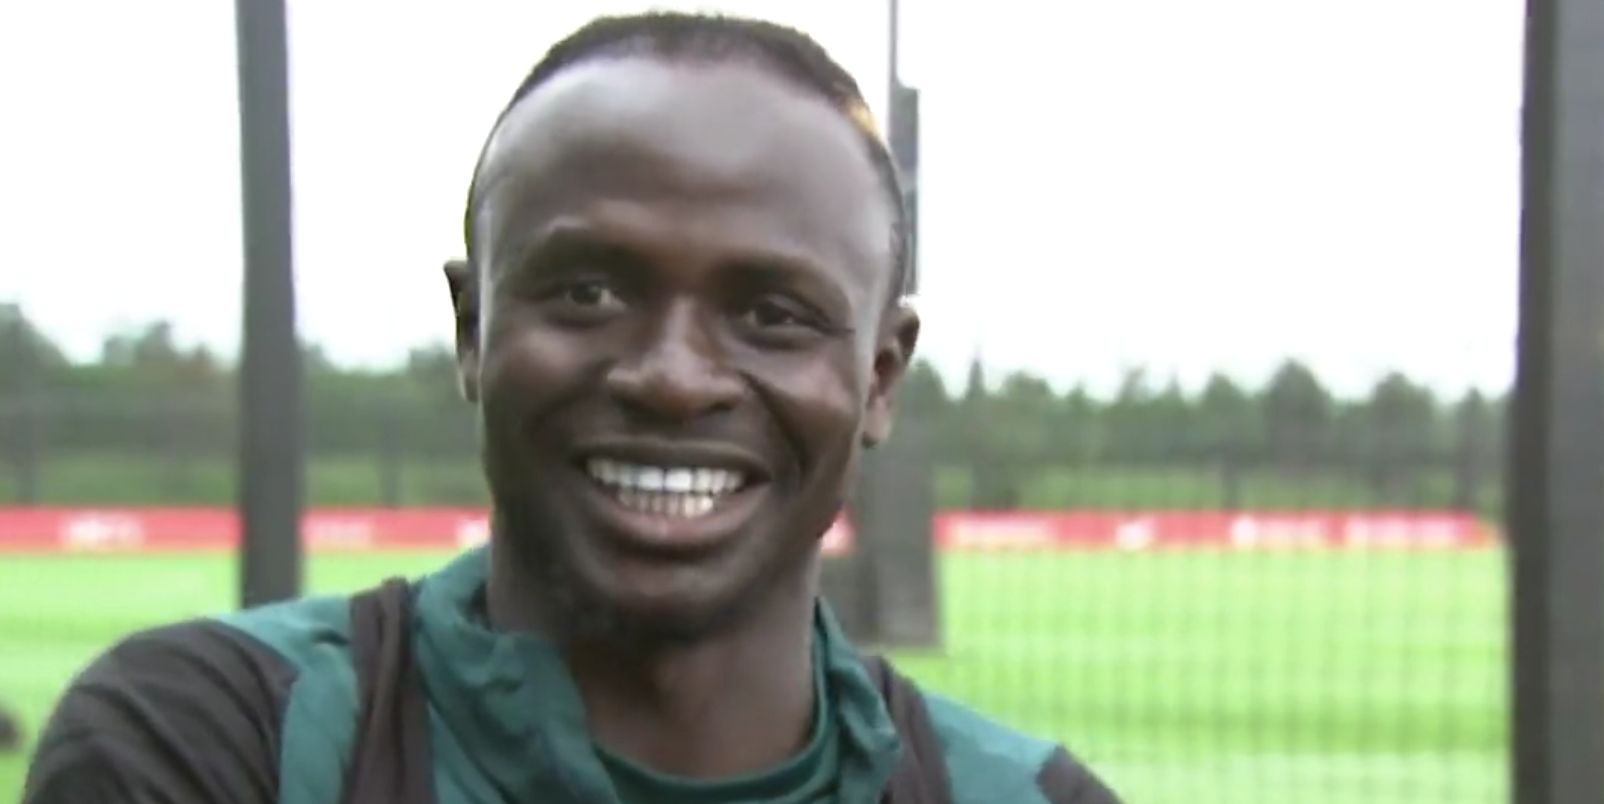 (Video) Sadio Mane remains coy on his contract talks but confirms he will ‘answer after the Champions League’ final